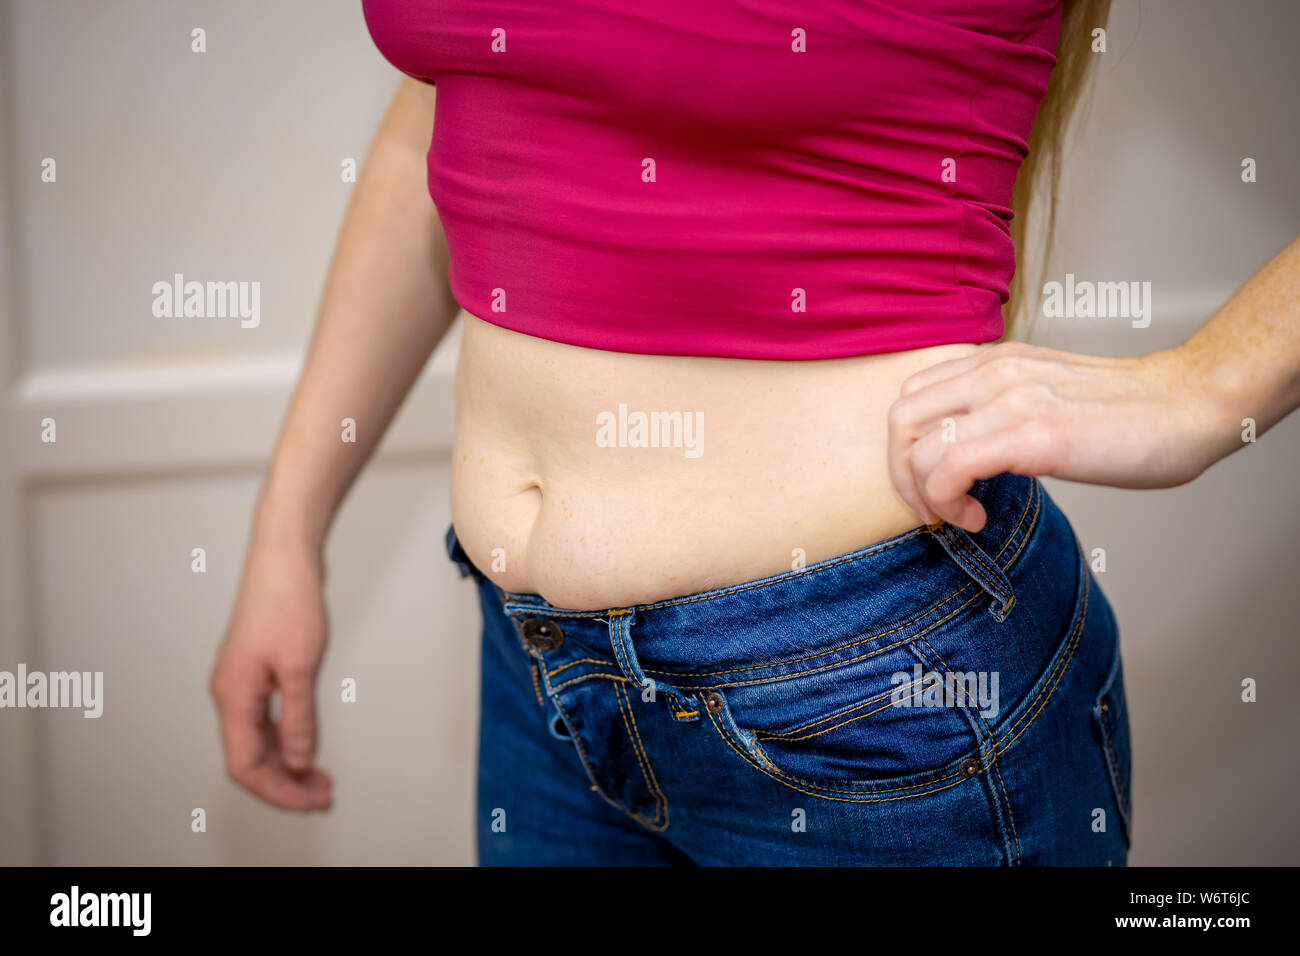 Closeup of woman pinching belly fat. Young slim woman in blue shorts pinching her abdomen. Diet and weight loss concept Stock Photo